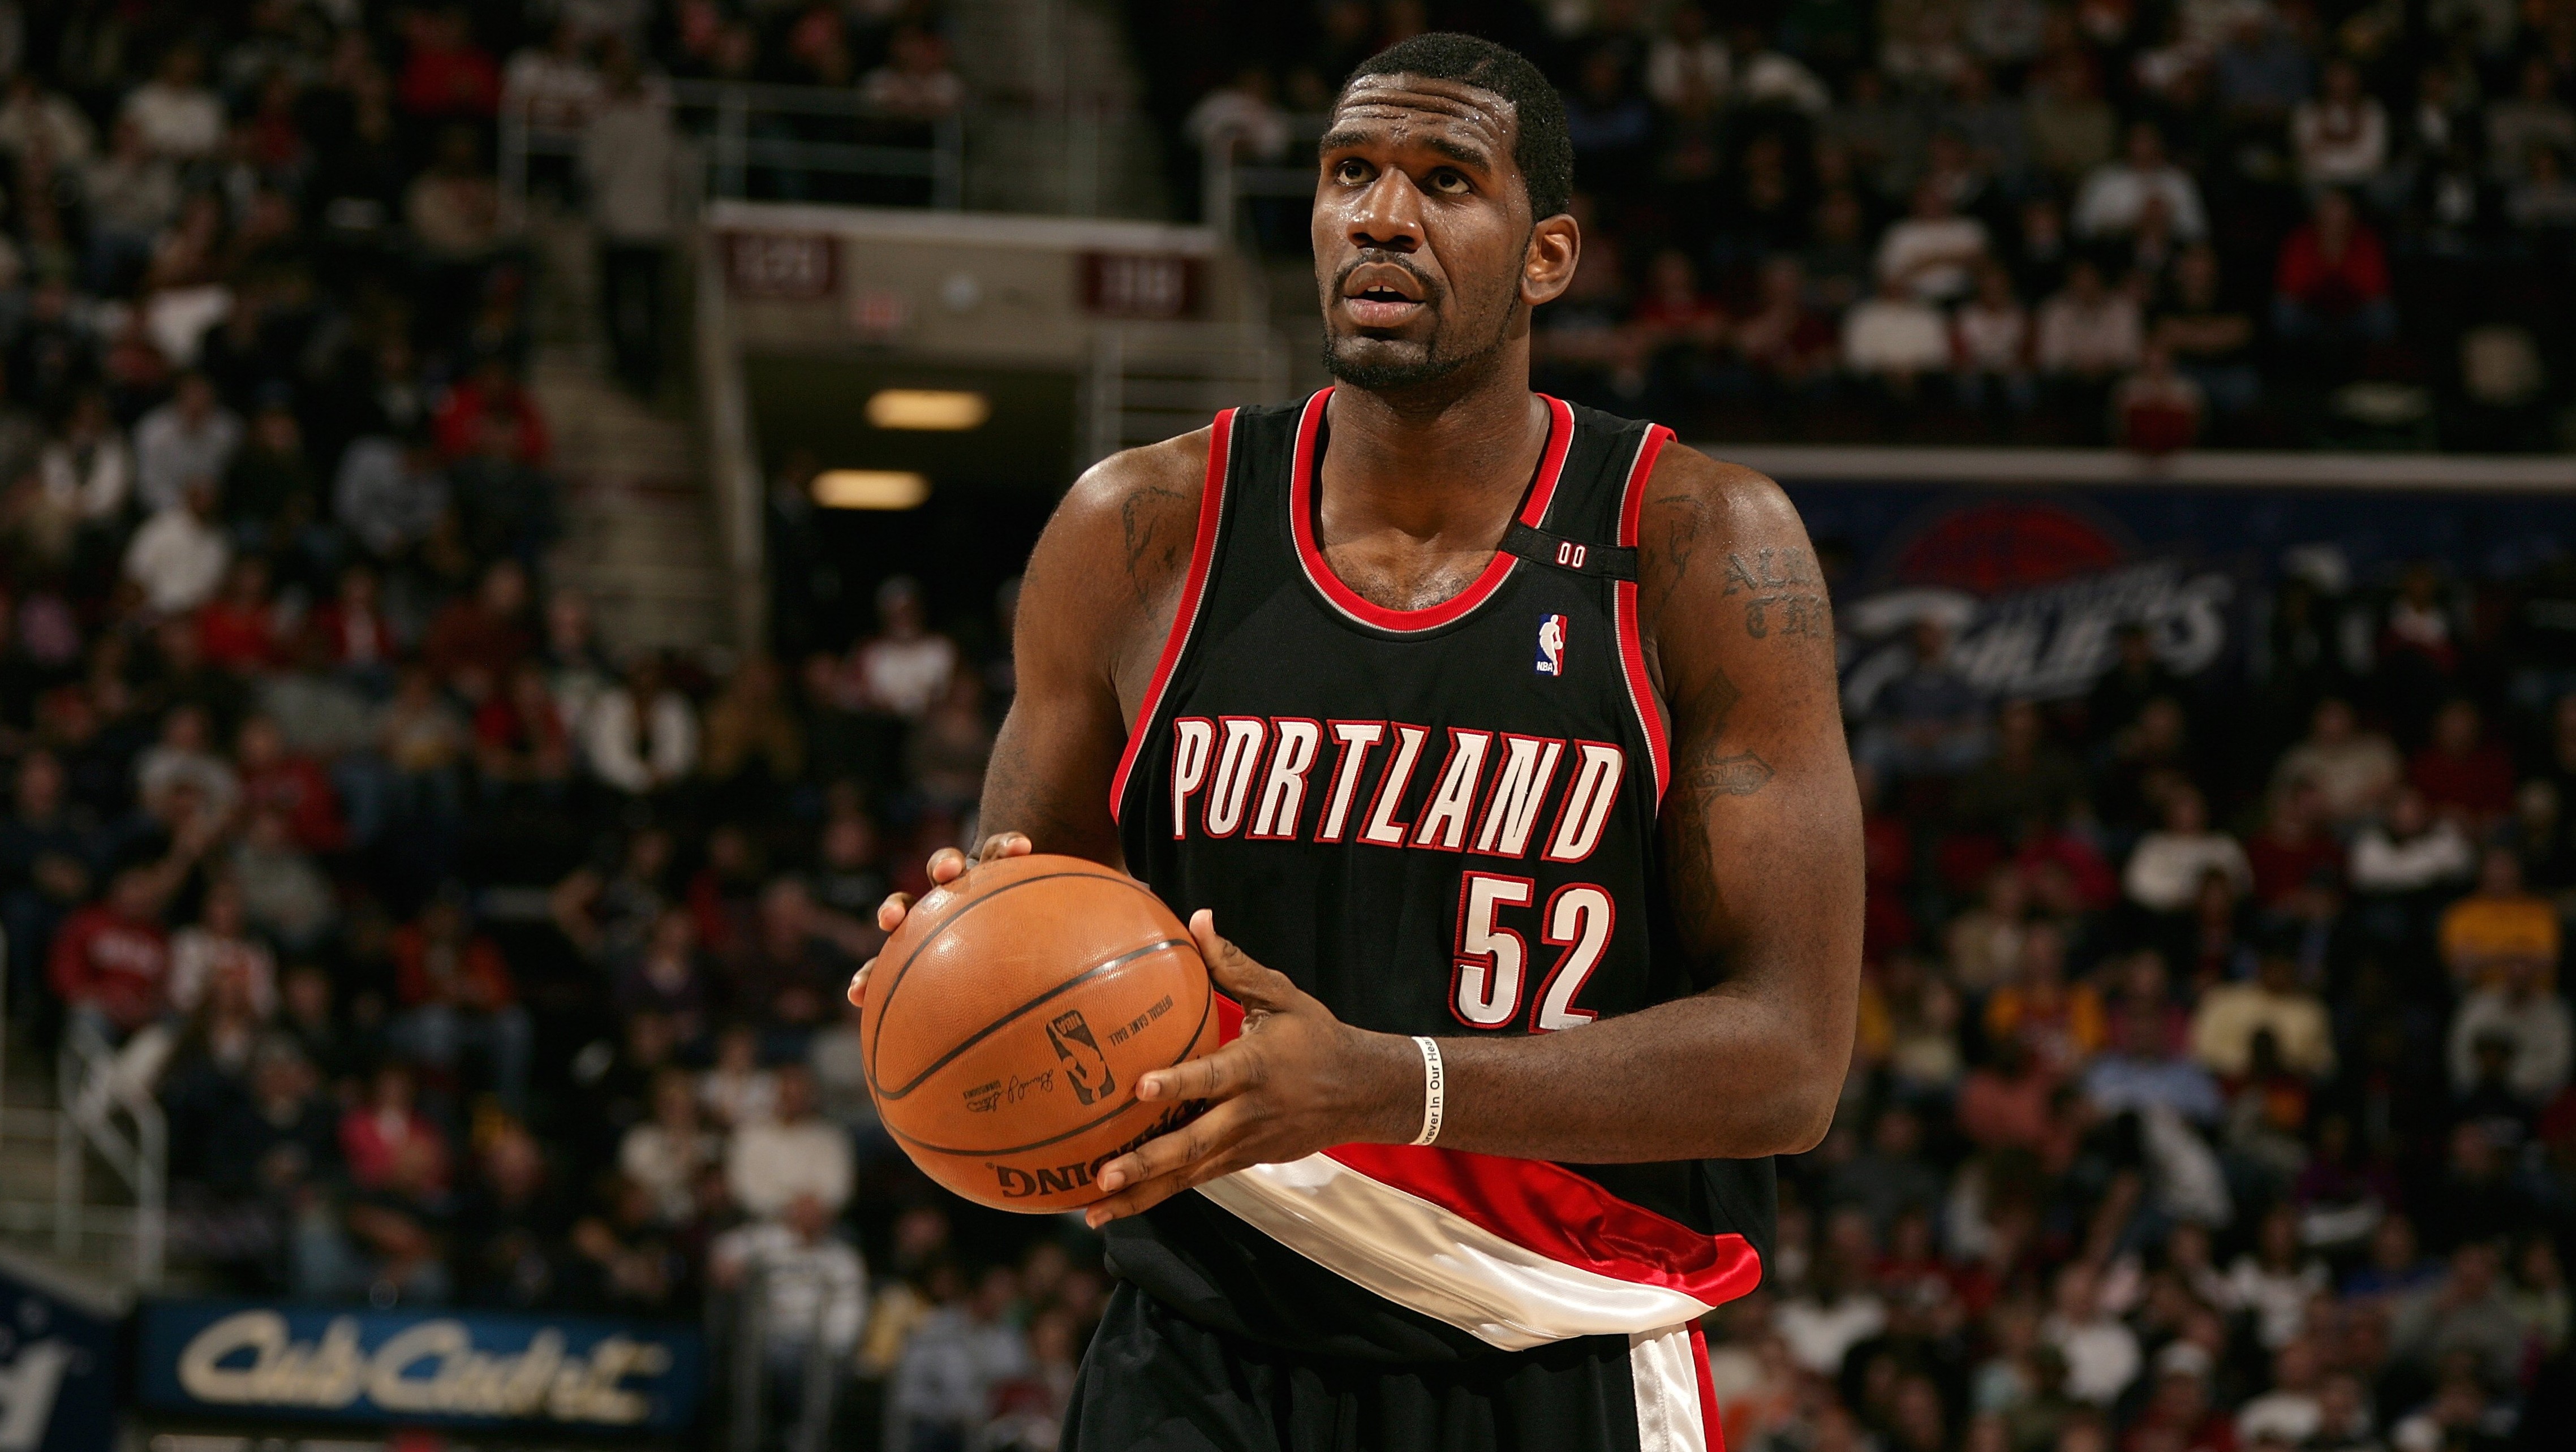 Consider Greg Oden, who was drafted 1st overall by the Portland Trailblazer...